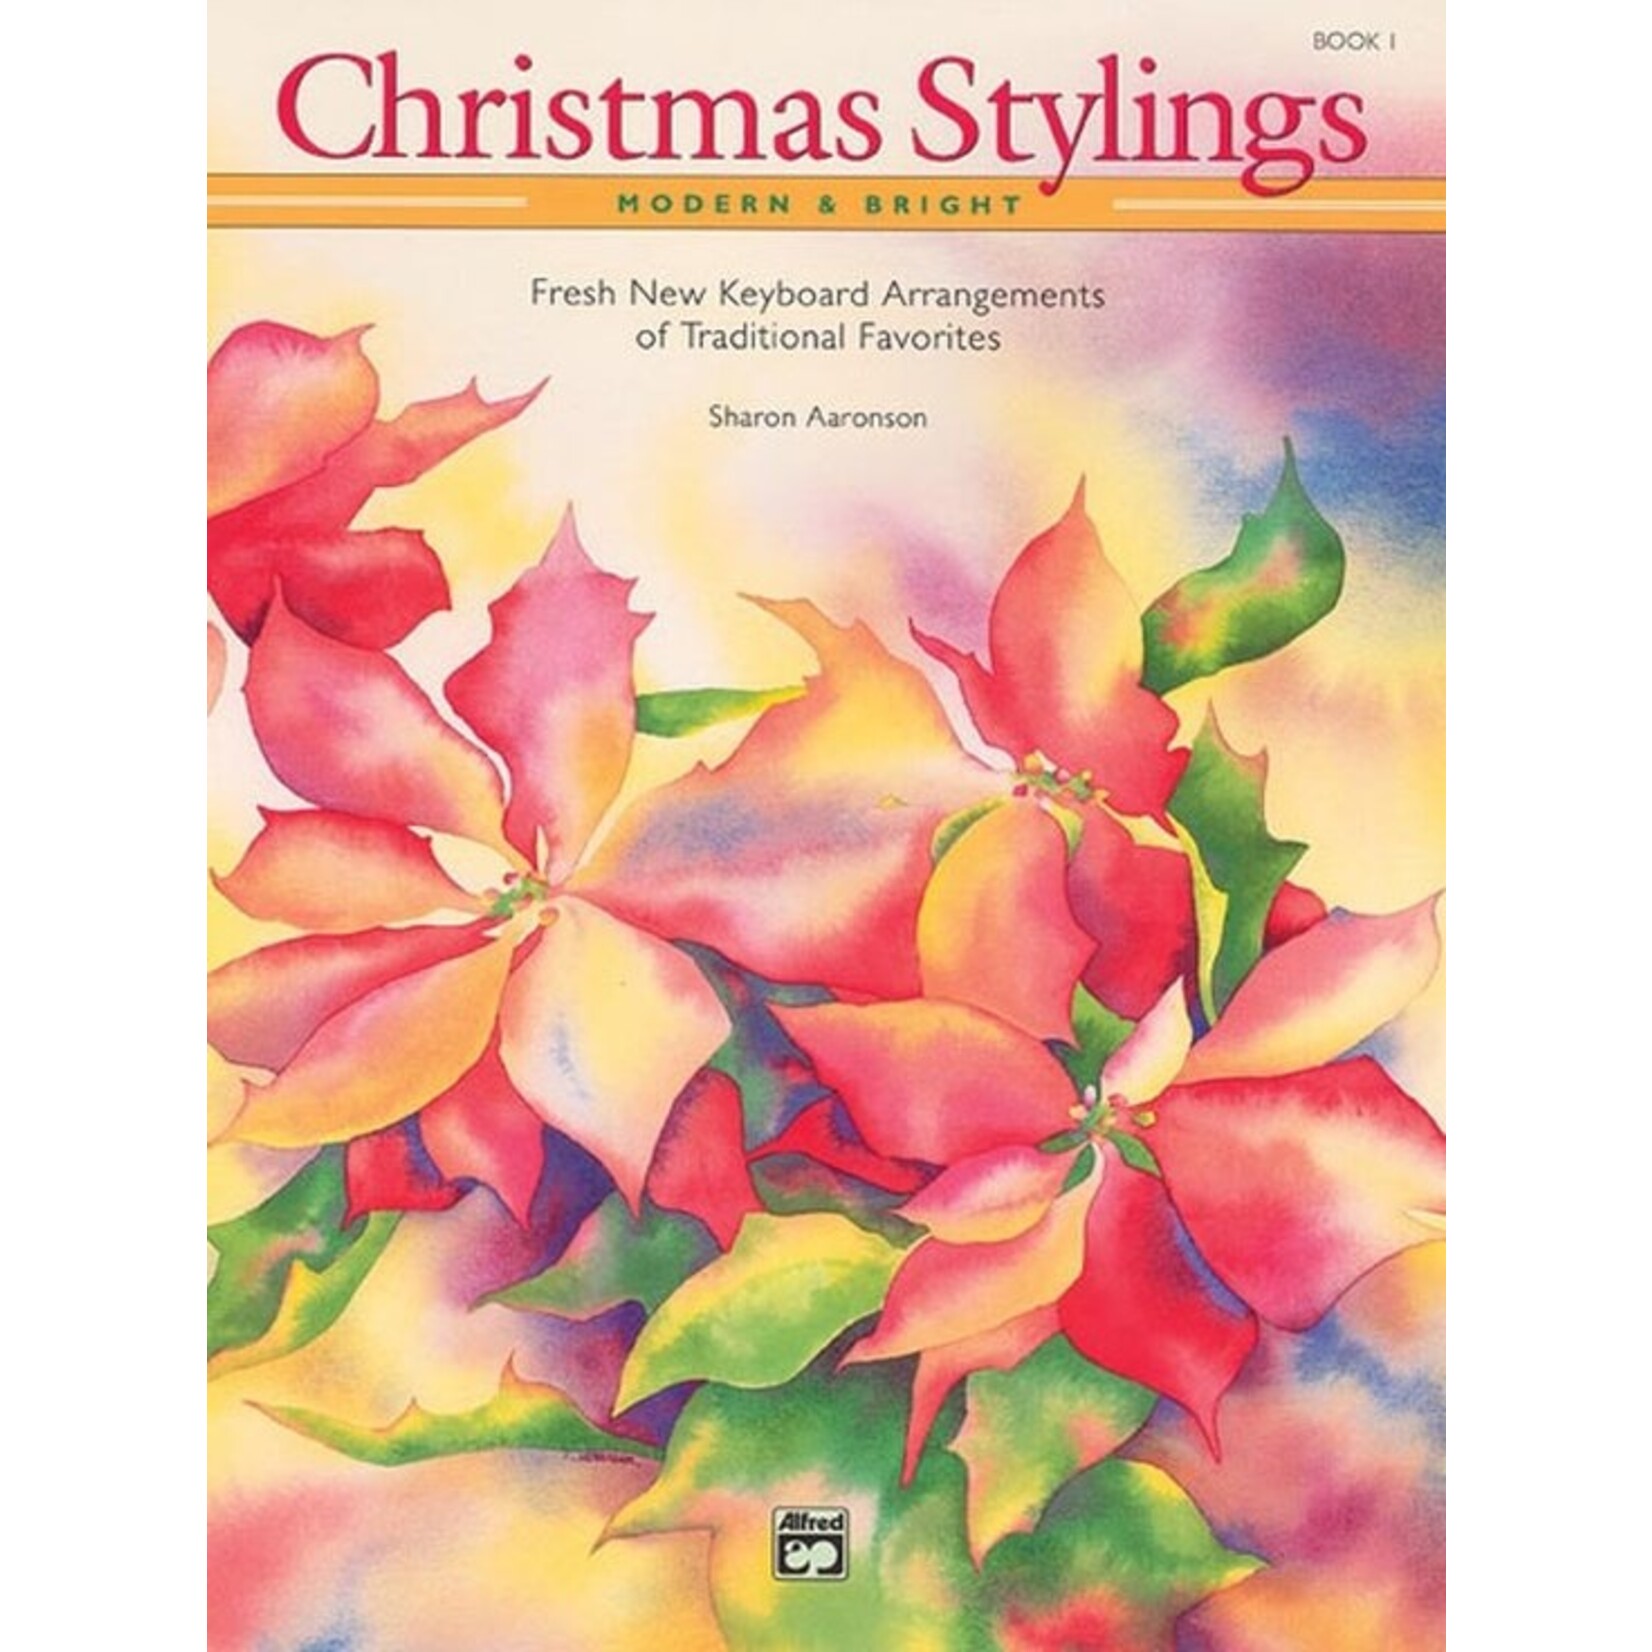 Christmas Stylings Modern & Bright Book One